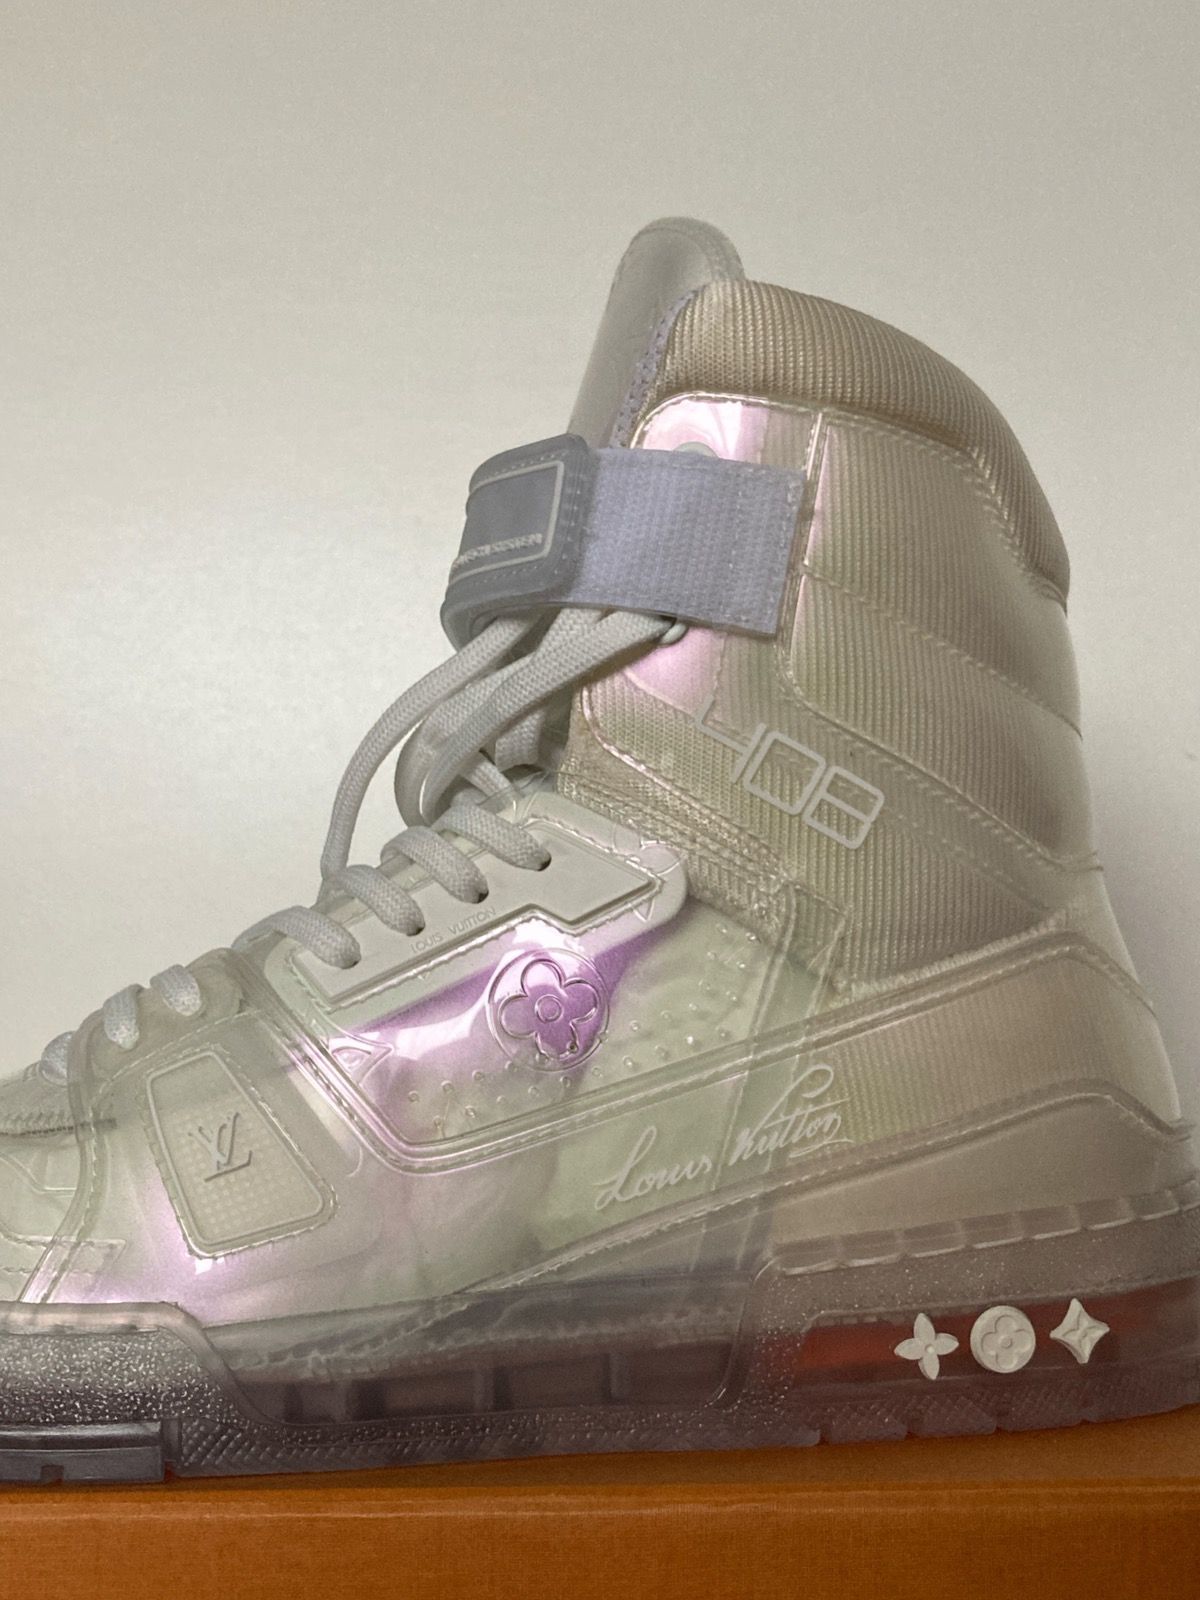 Virgil Abloh Goes Translucent With the Louis Vuitton 408 - Sneaker